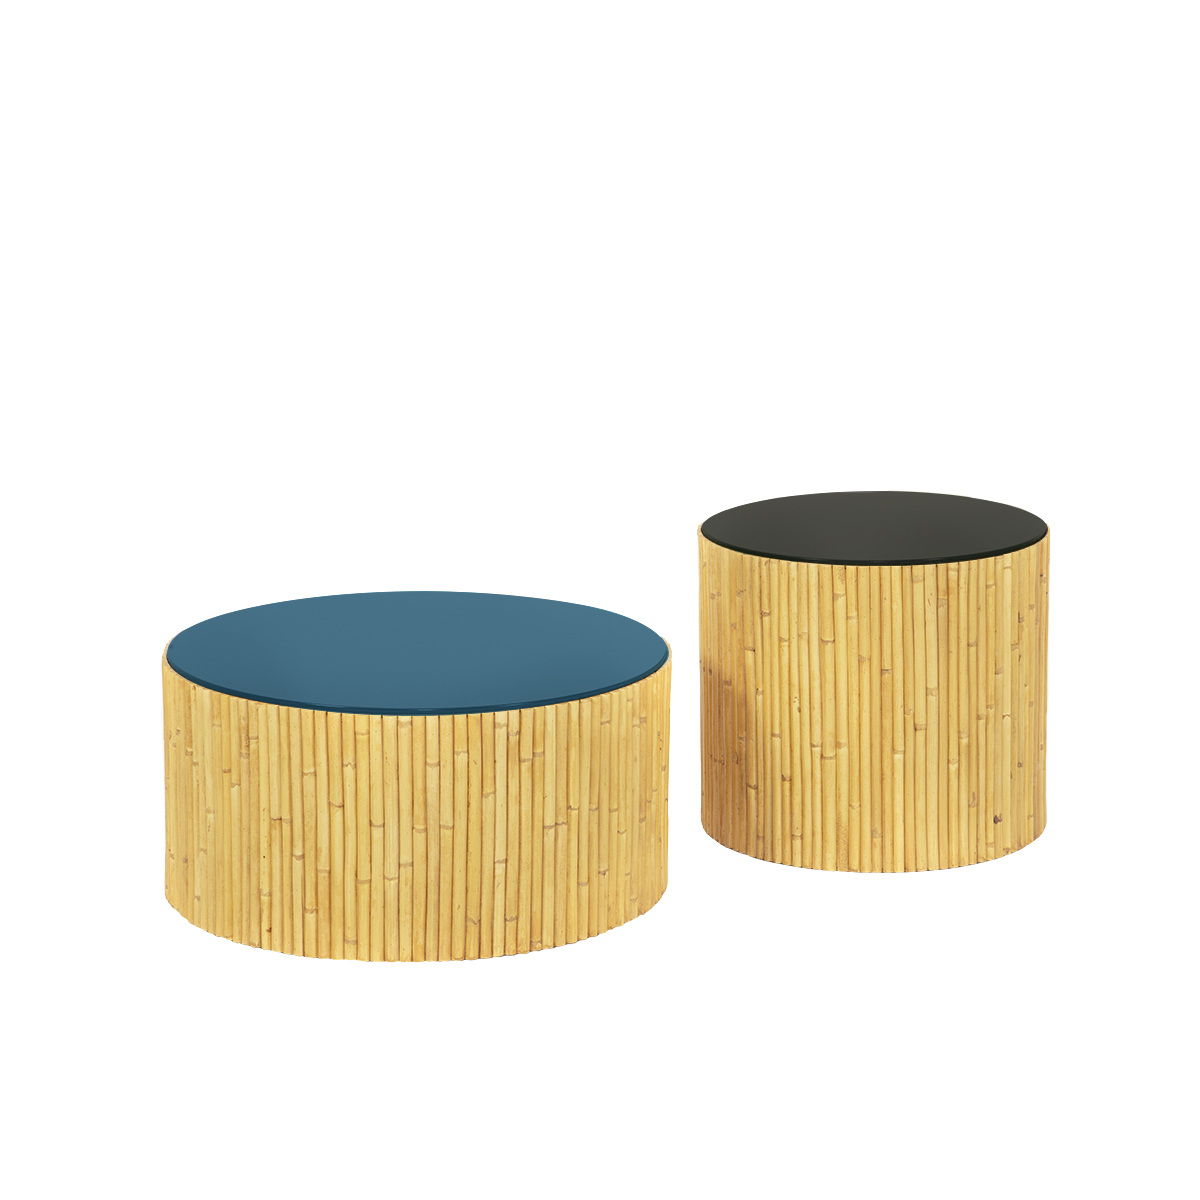 Duo of Coffee Tables Rivera, Natural / Black - ø60 x H30 cm and ø45 x H40 cm - Rattan / Lacquered wood - image 13